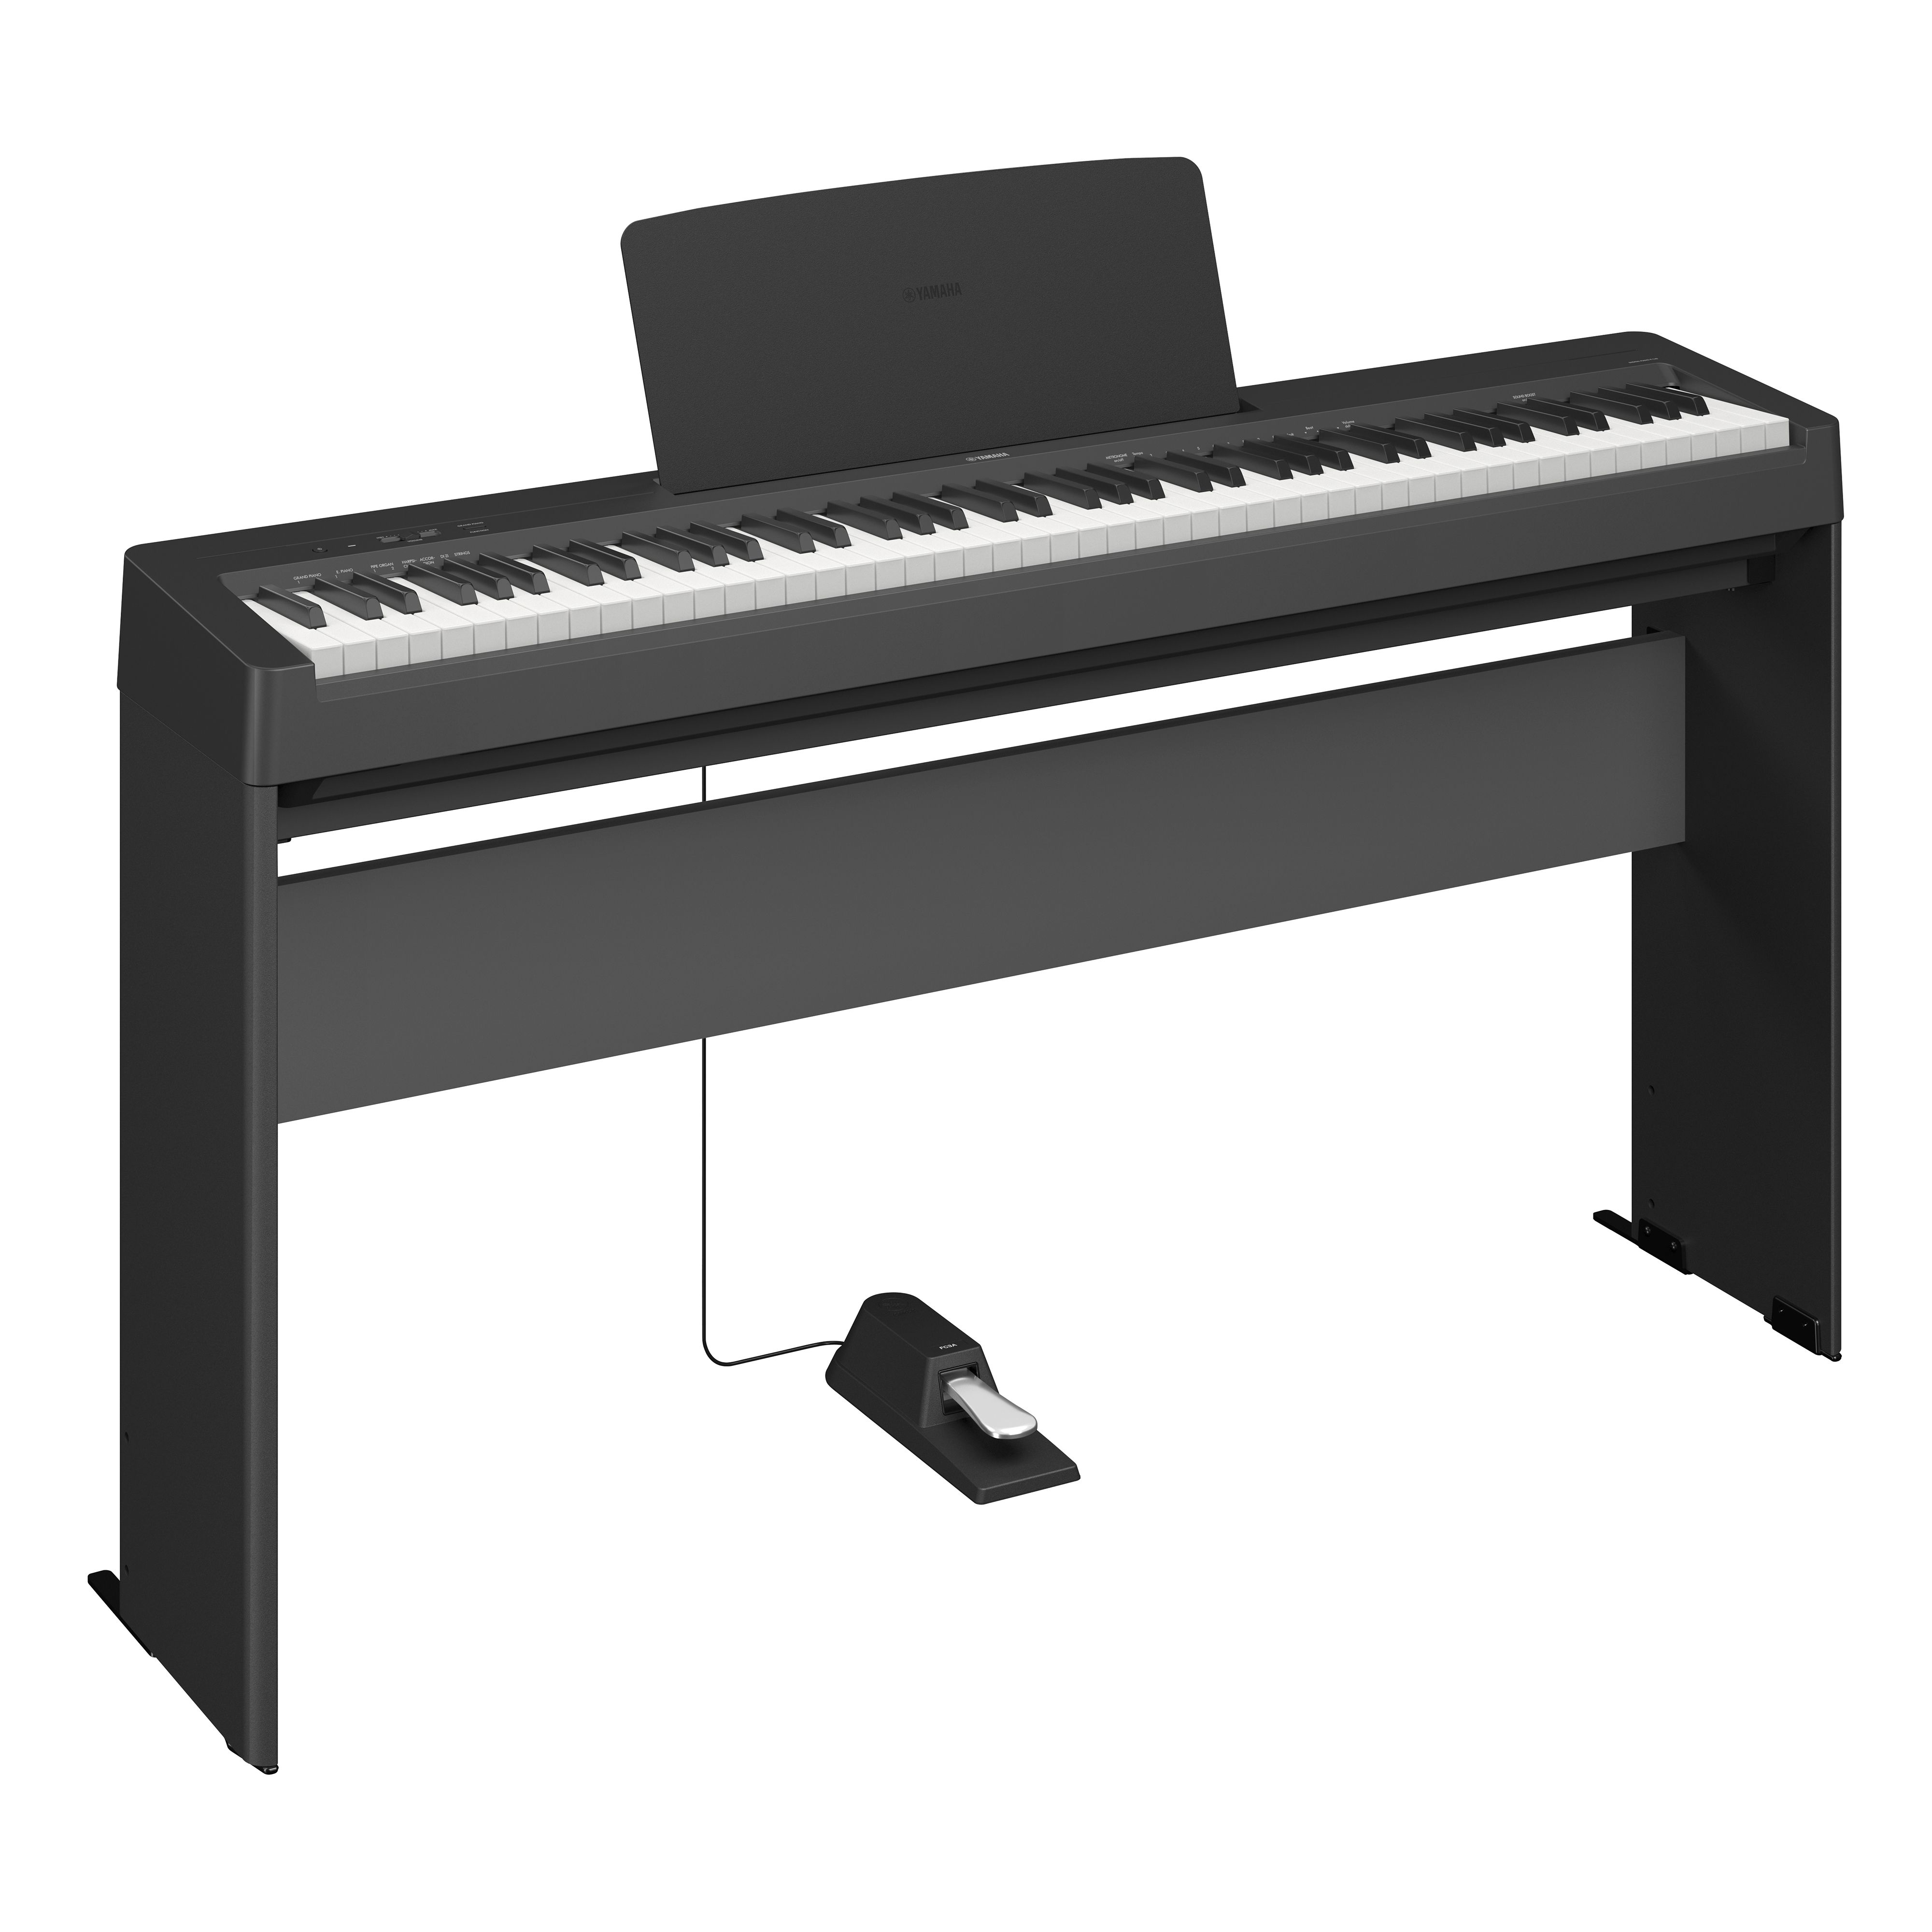 P-145 - Overview - P Series - Pianos - Musical Instruments 